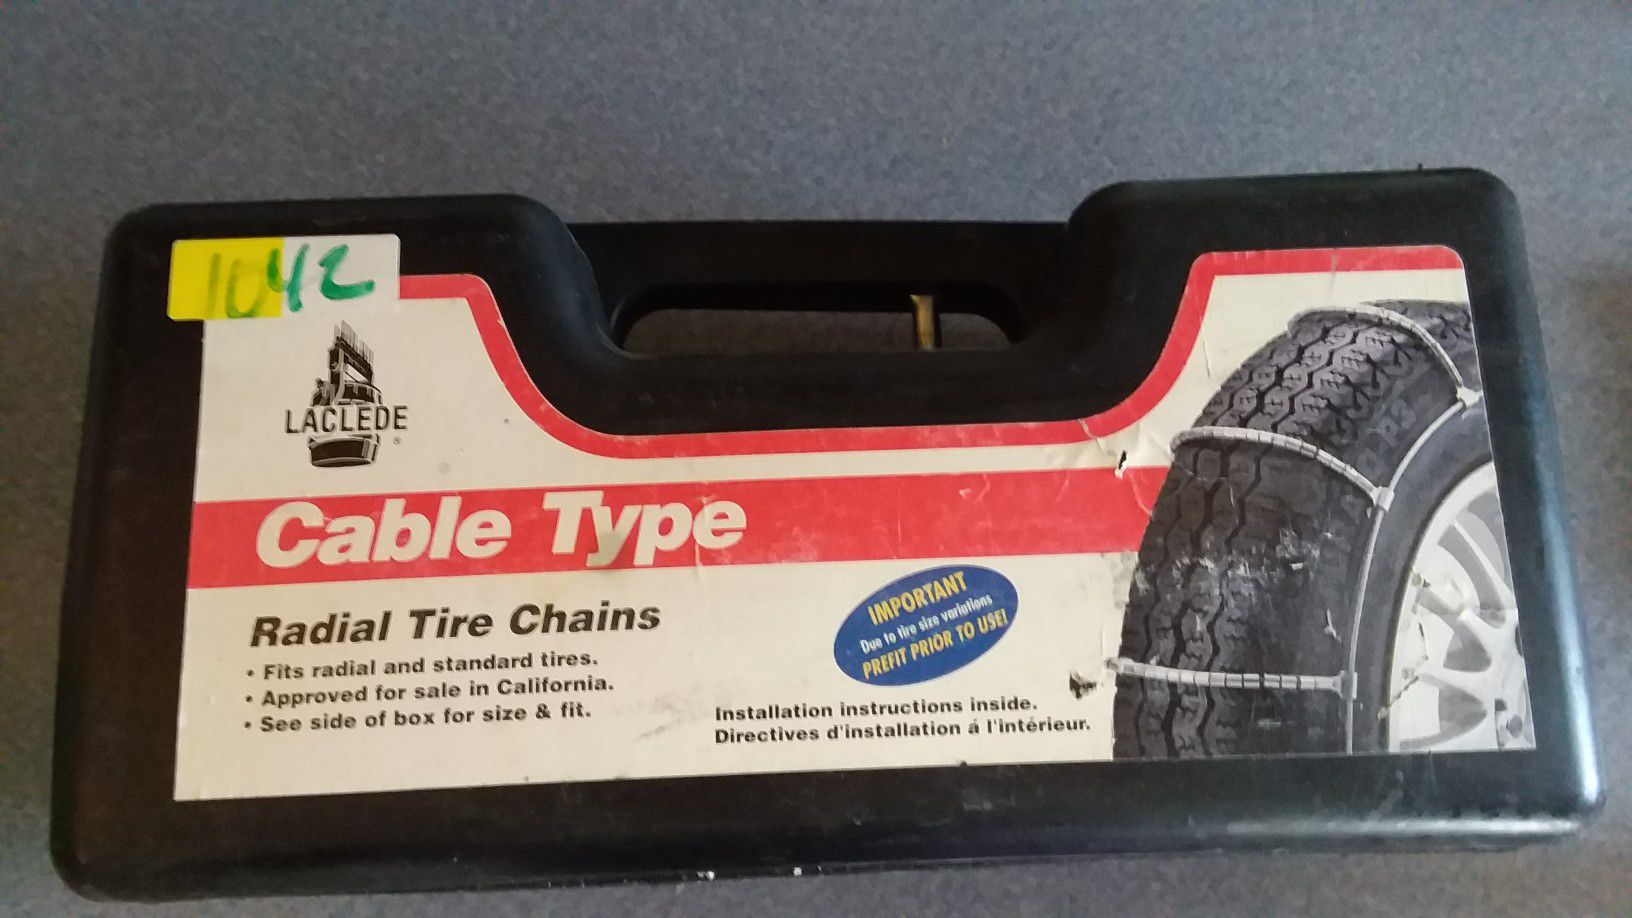 Tire chains, there New